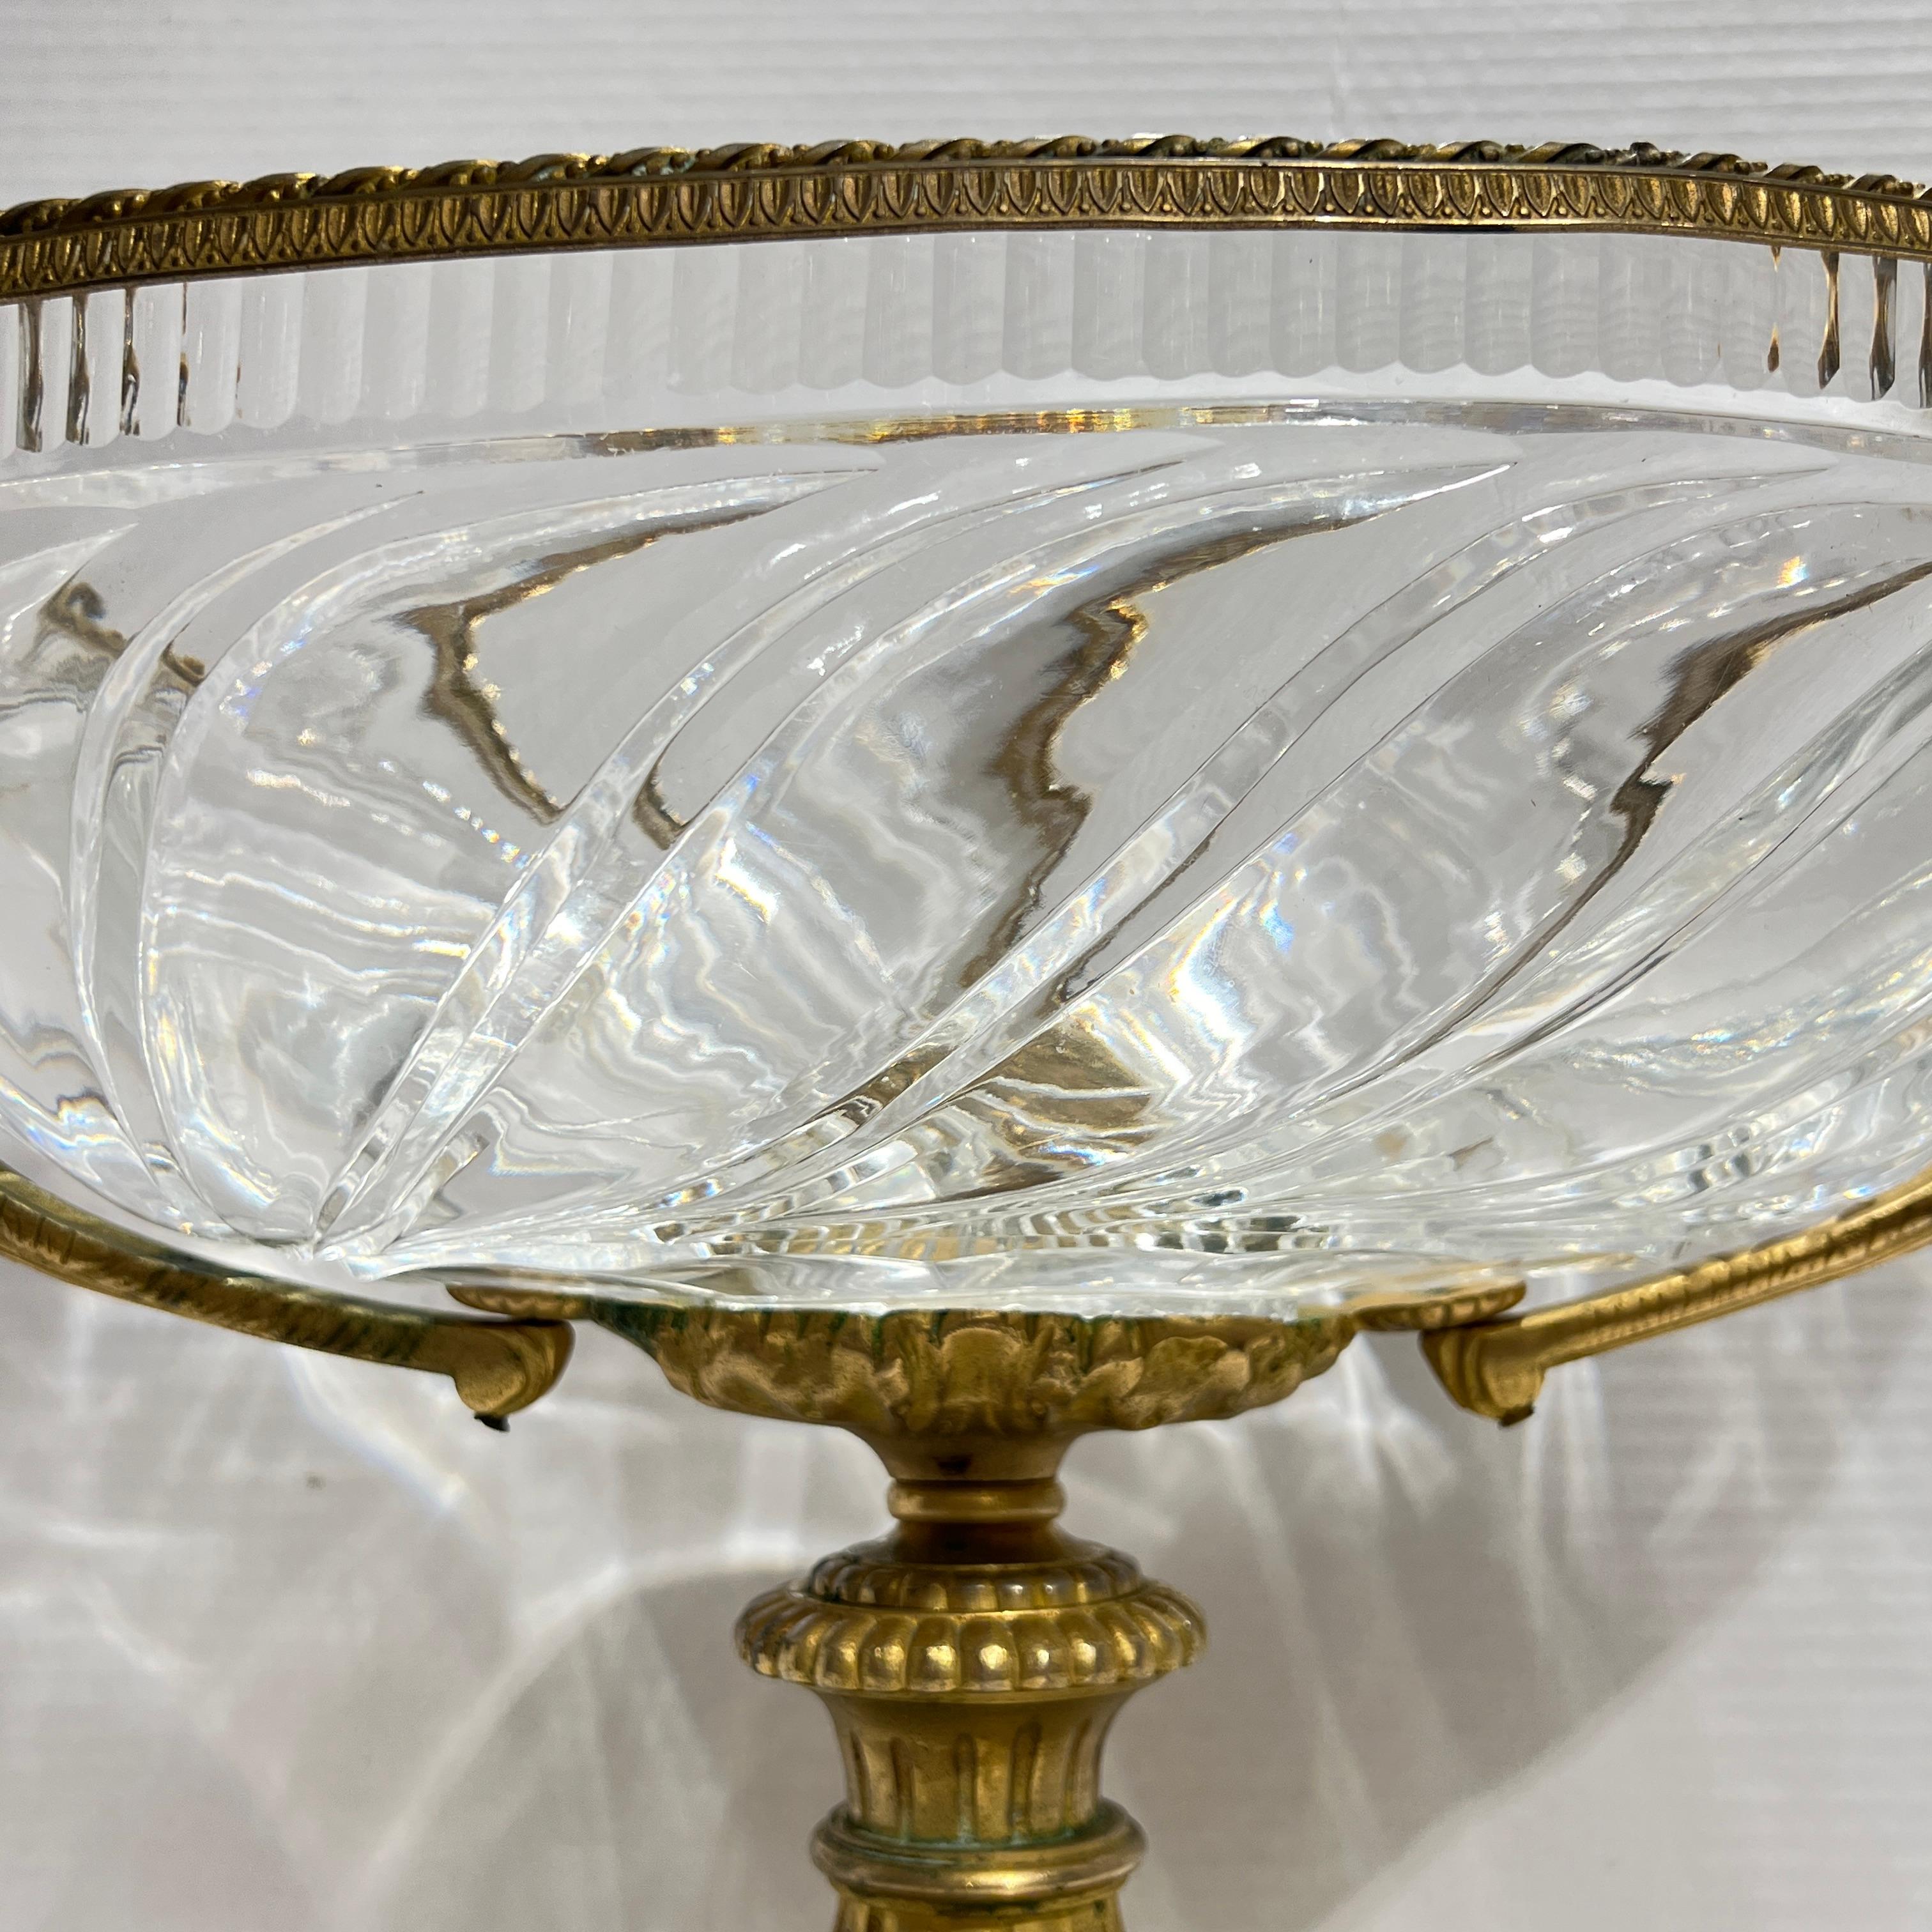 Baccarat style Gilt Bronze Mounted Crystal Glass Centerpiece Bowl 13